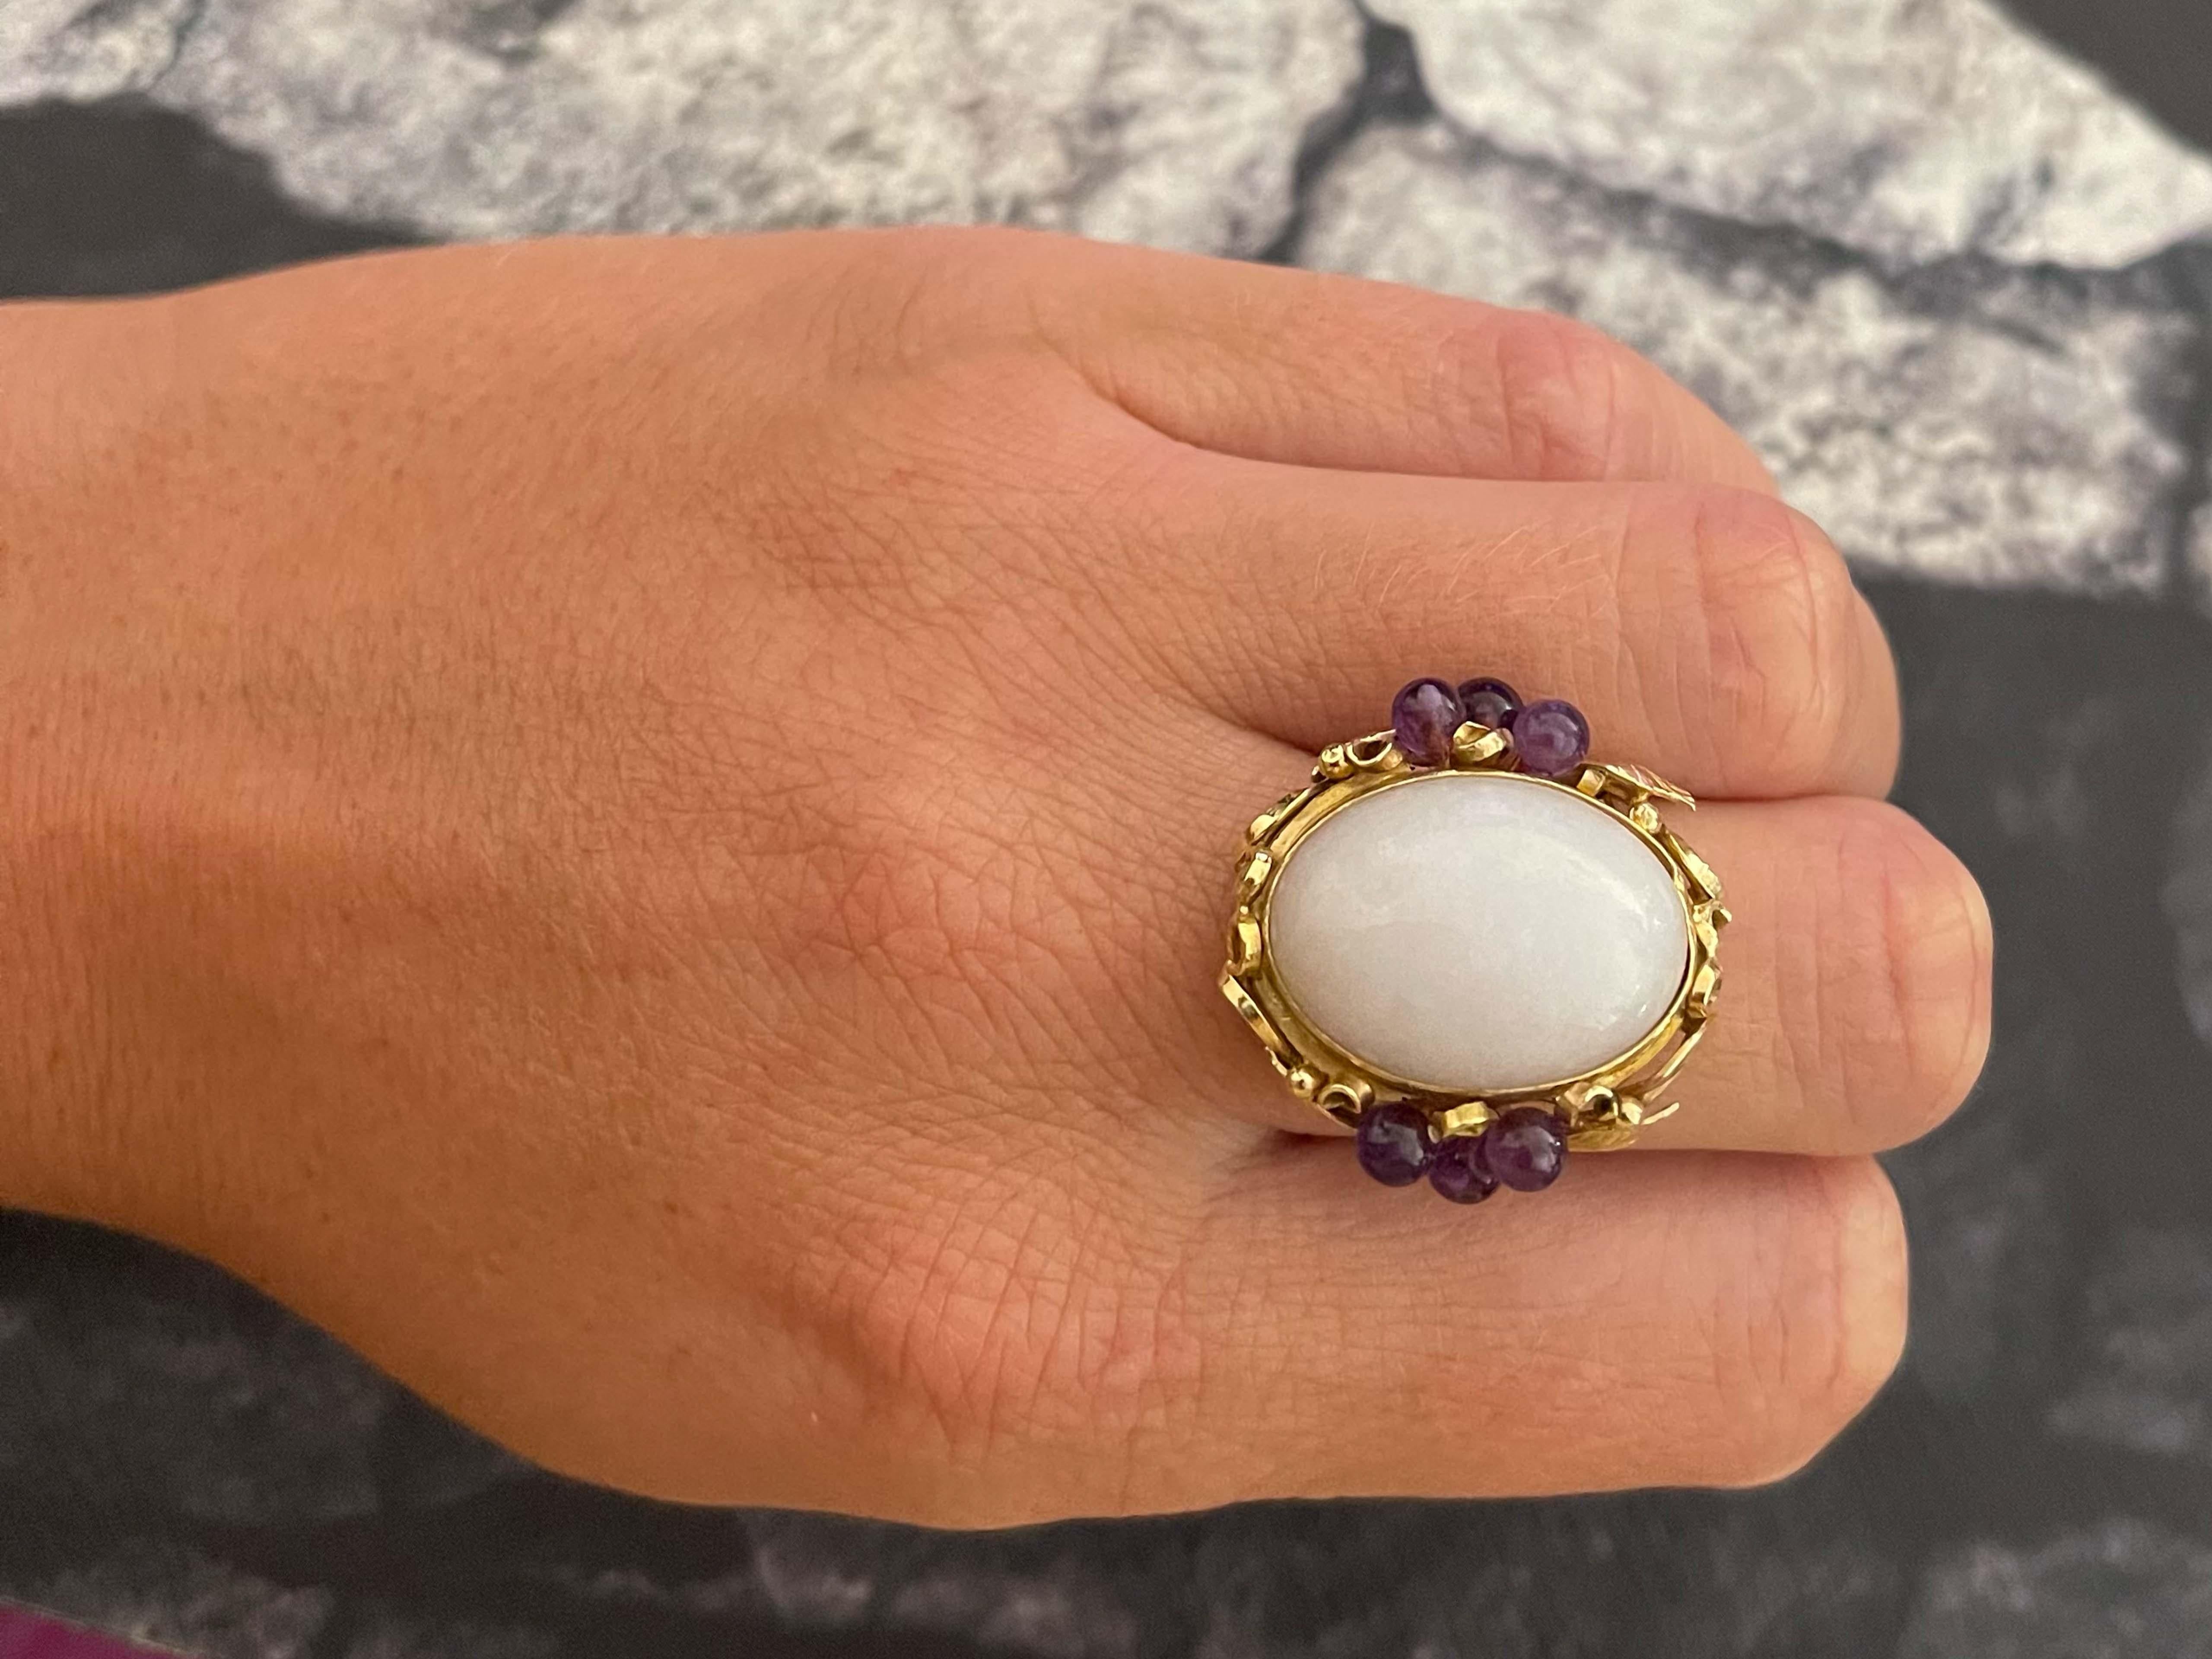 Selling just the ring in this listing, however the pictured set with earrings and necklace is also available. Please message us if interested in the set.
​
​Ring Specifications:

Designer: Ming's

Metal: 14k Yellow Gold

Total Weight: 11.8